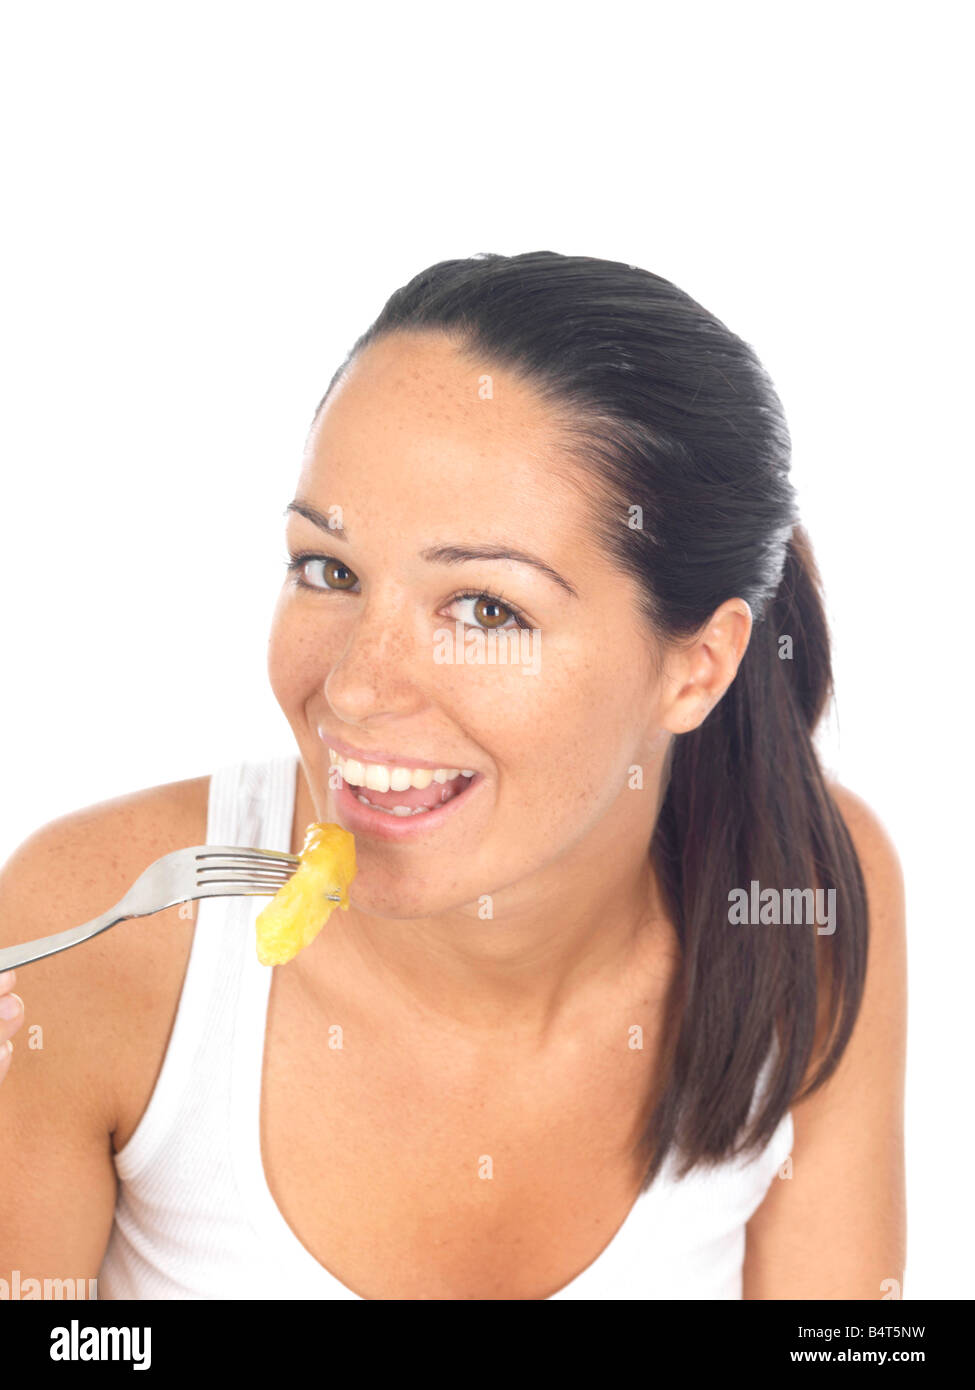 Young Woman Eating Chips Model Released Stock Photo